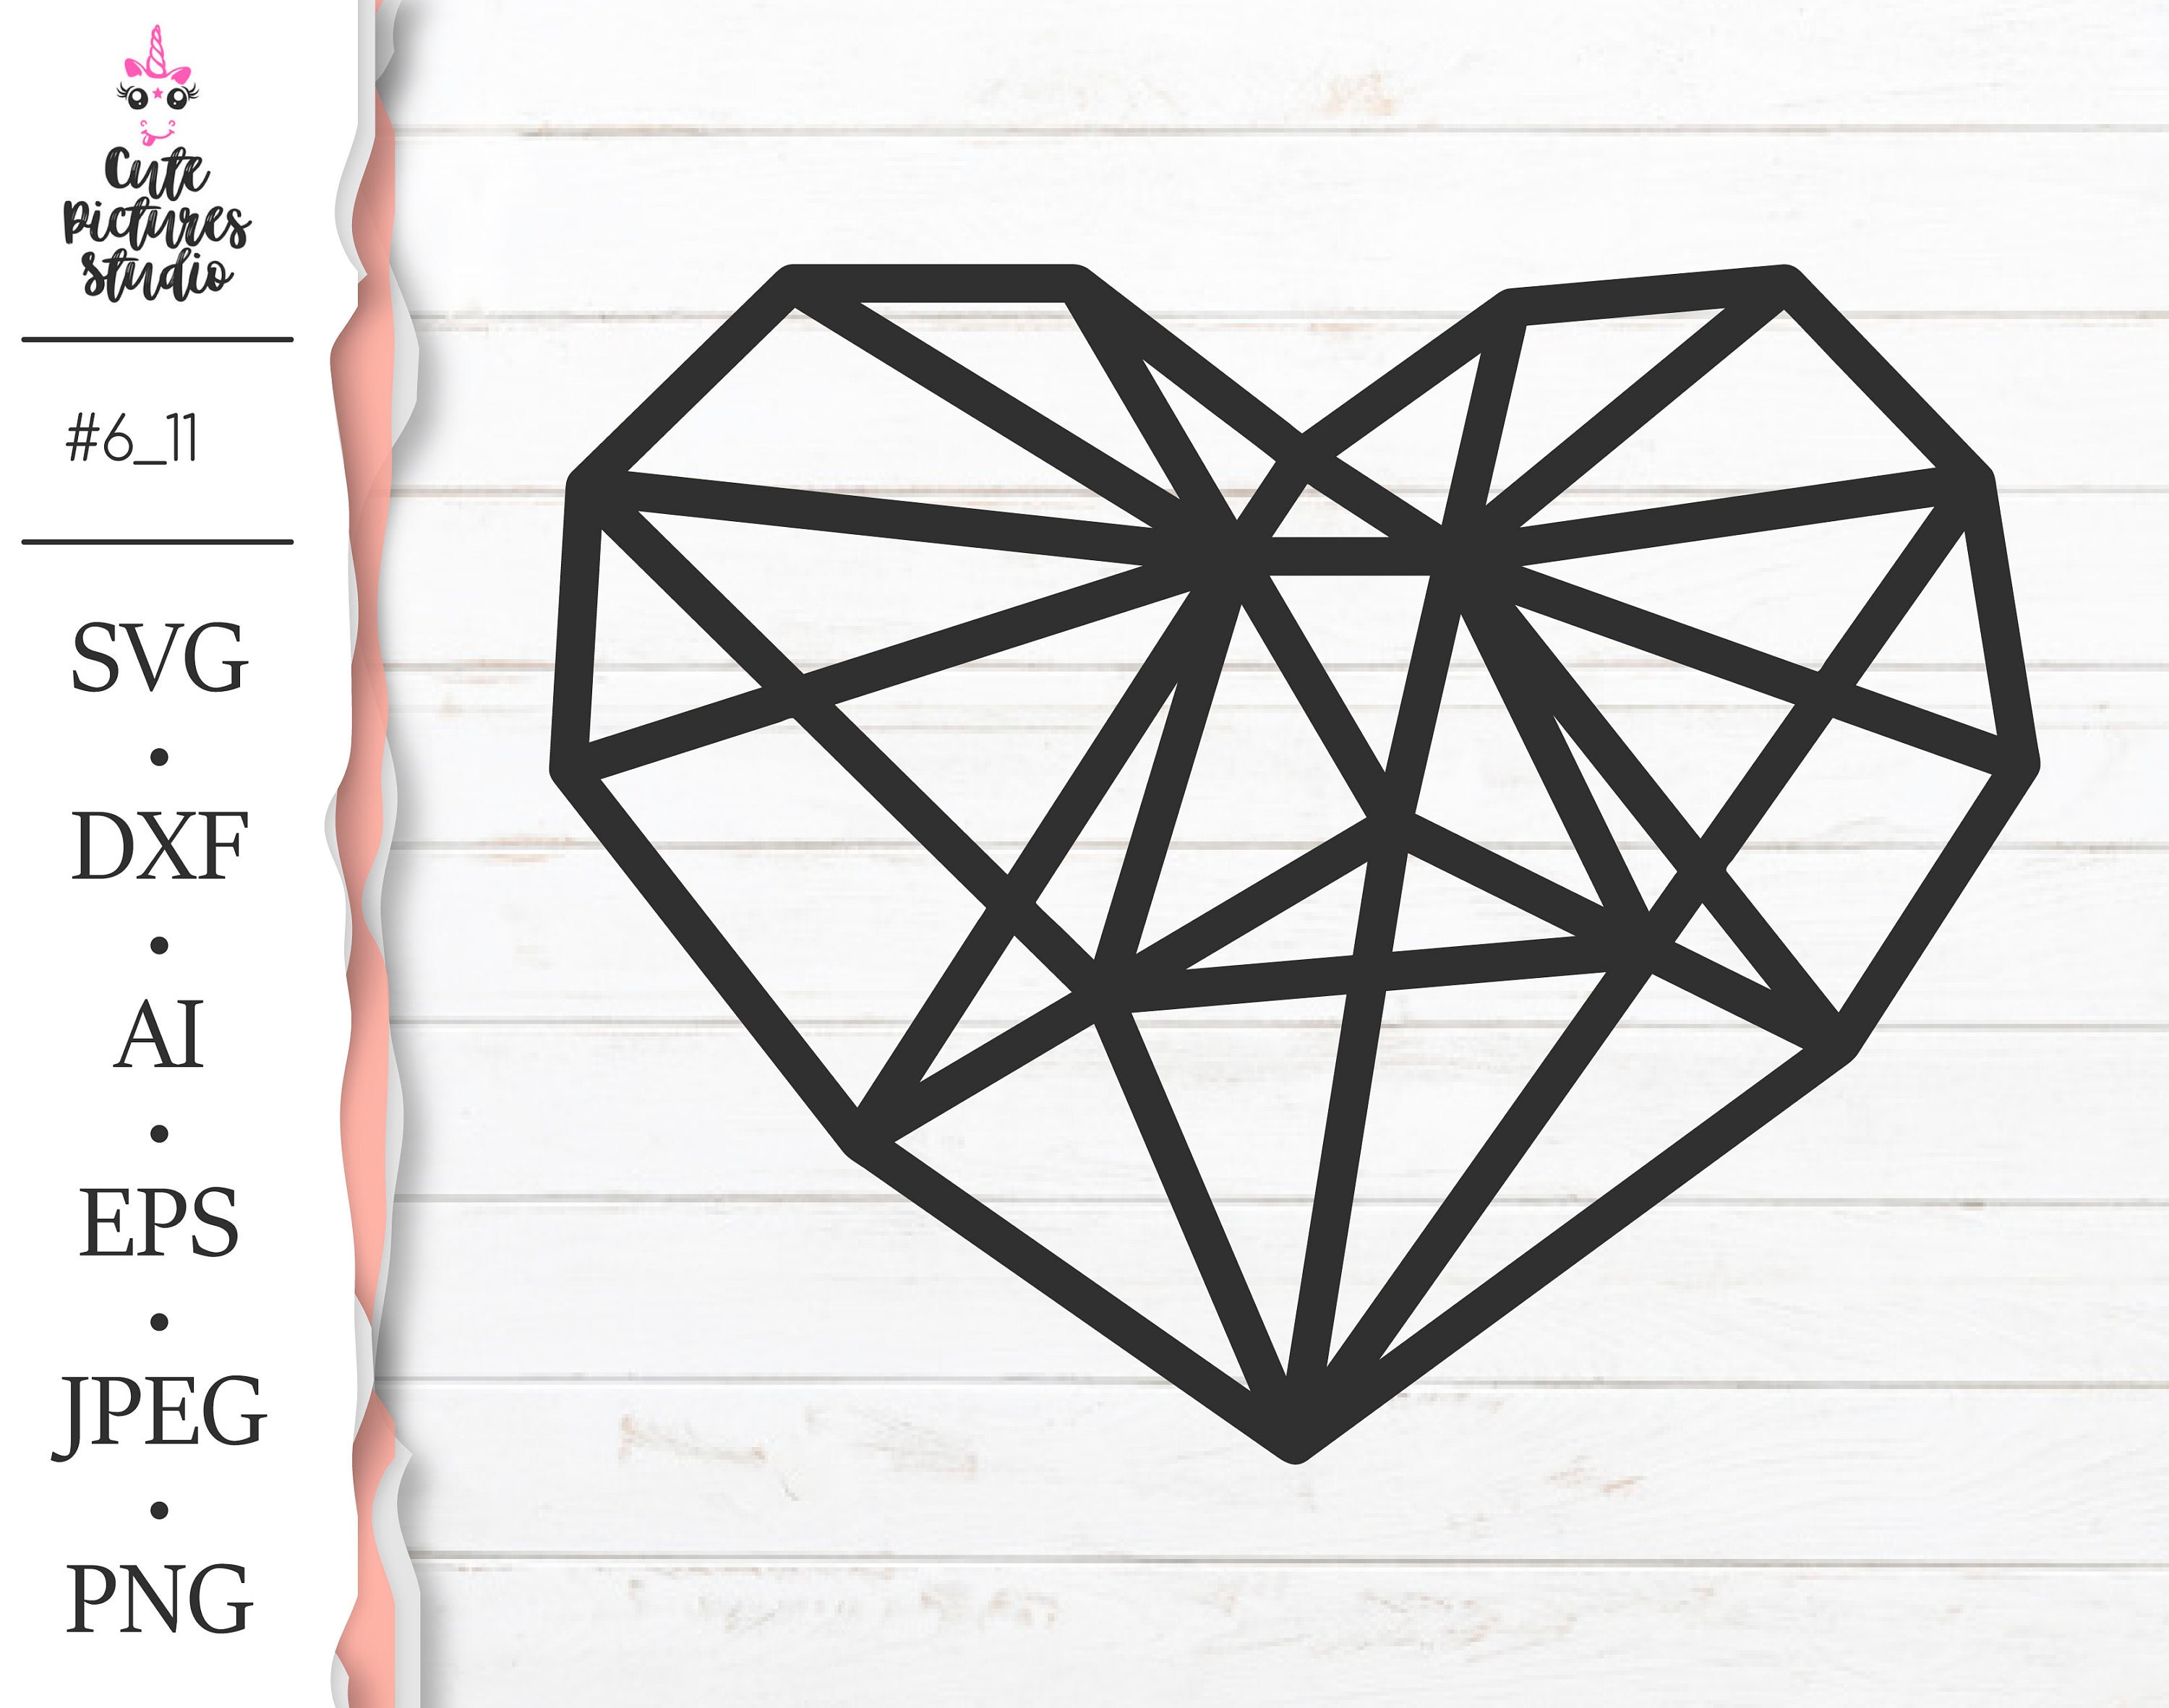 Valentine's Day DIY Heart Scrapbooking svg template Instant Download 6_12 Heart Cricut cut file svg Polygonal crystal heart SVG DXF png